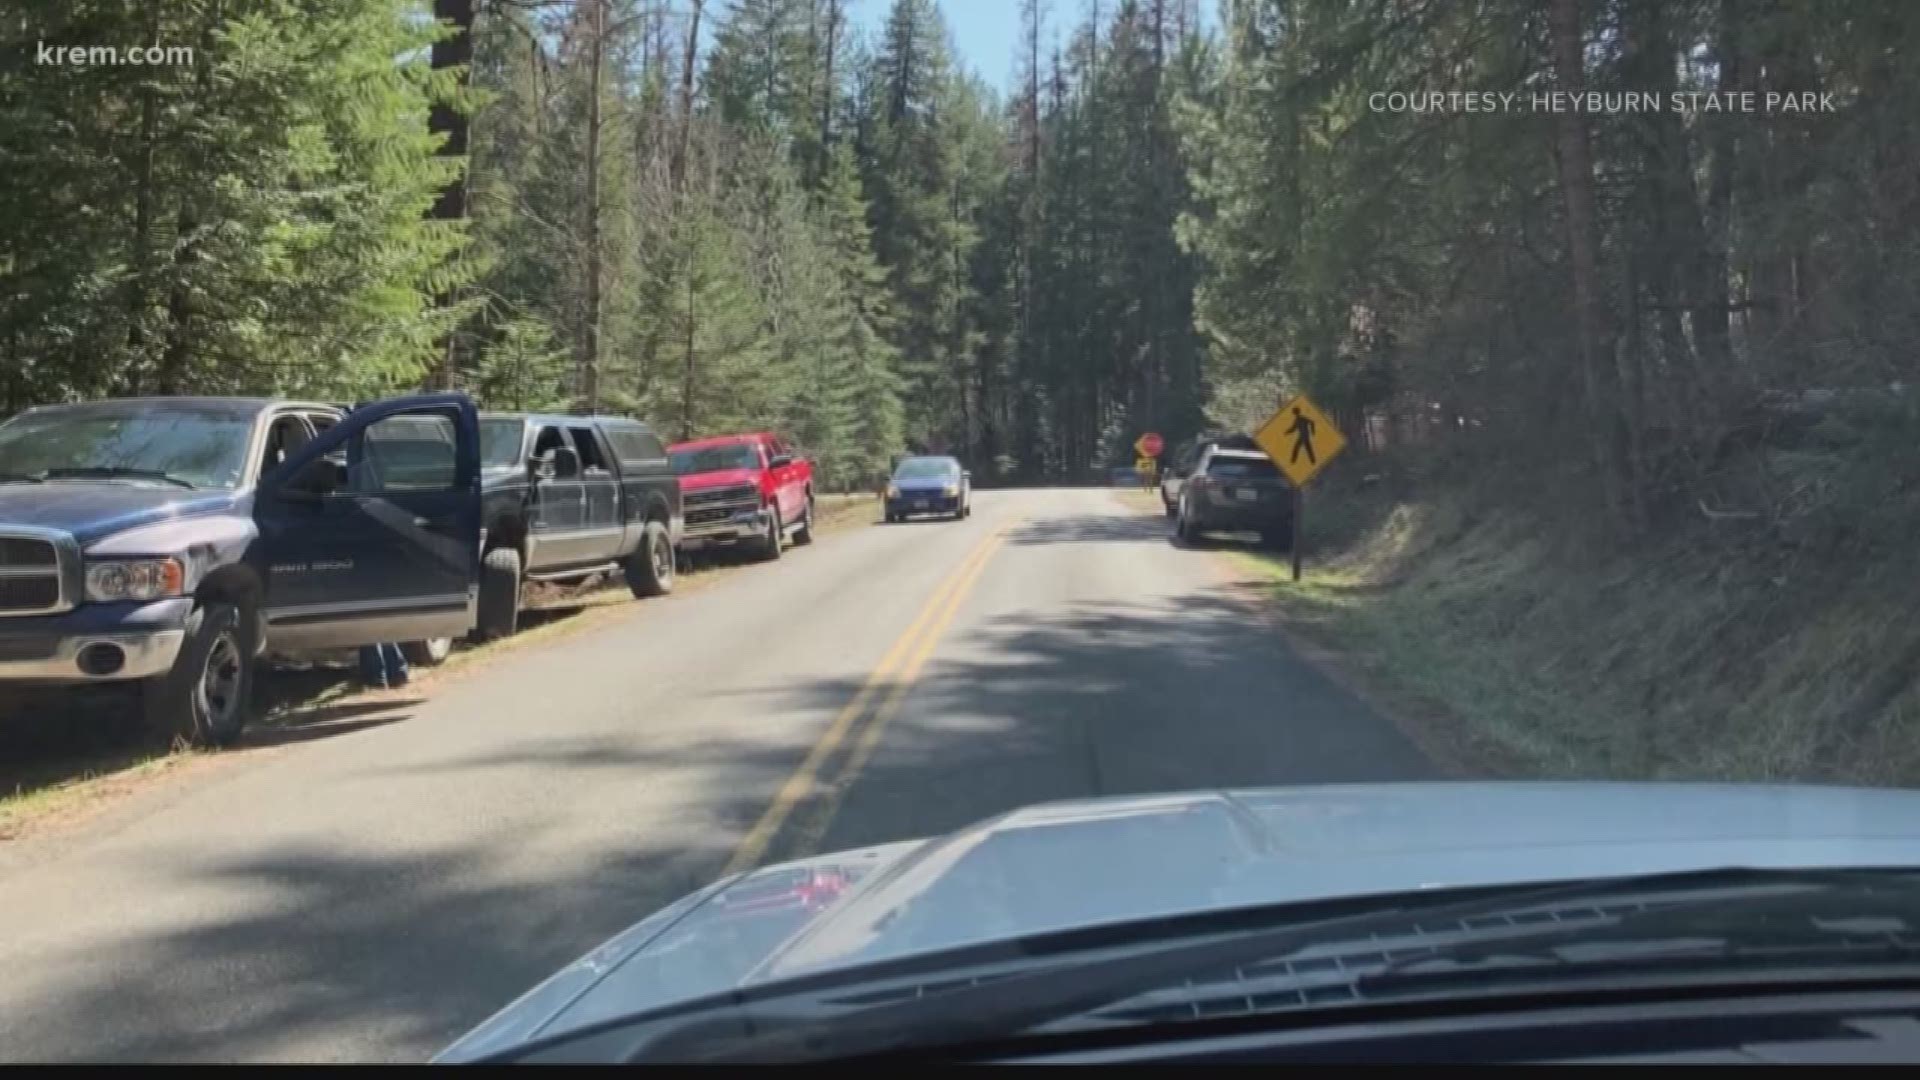 With stay home orders limiting what people can do in Washington and Idaho, people have been seen flocking to North Idaho State Parks.